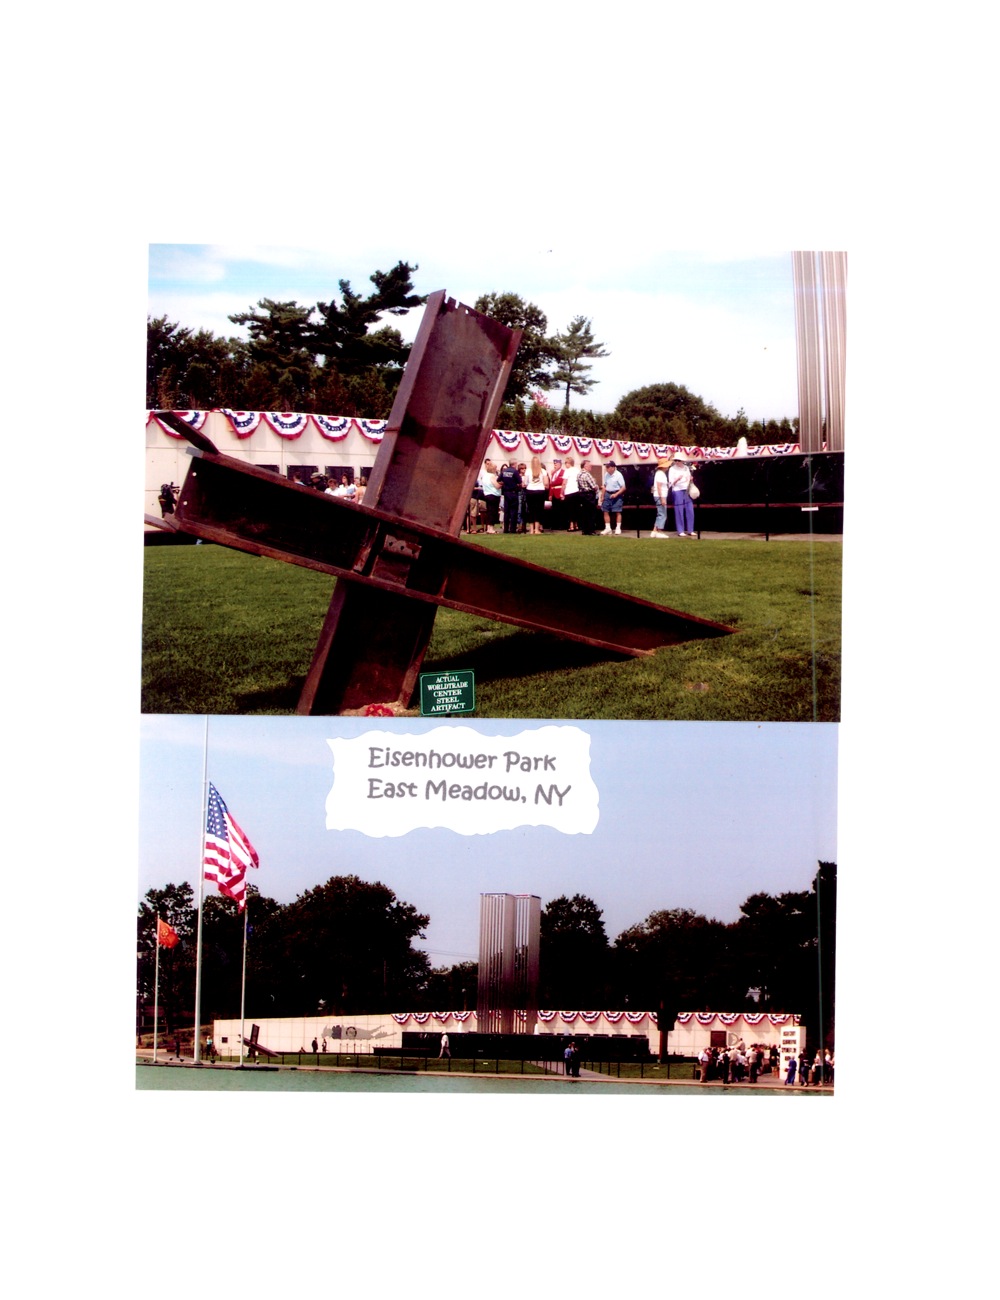 Memorial for the victims of the terrorist attacks on September 11, 2001 at Eisenhower Park in East Meadow, New York.